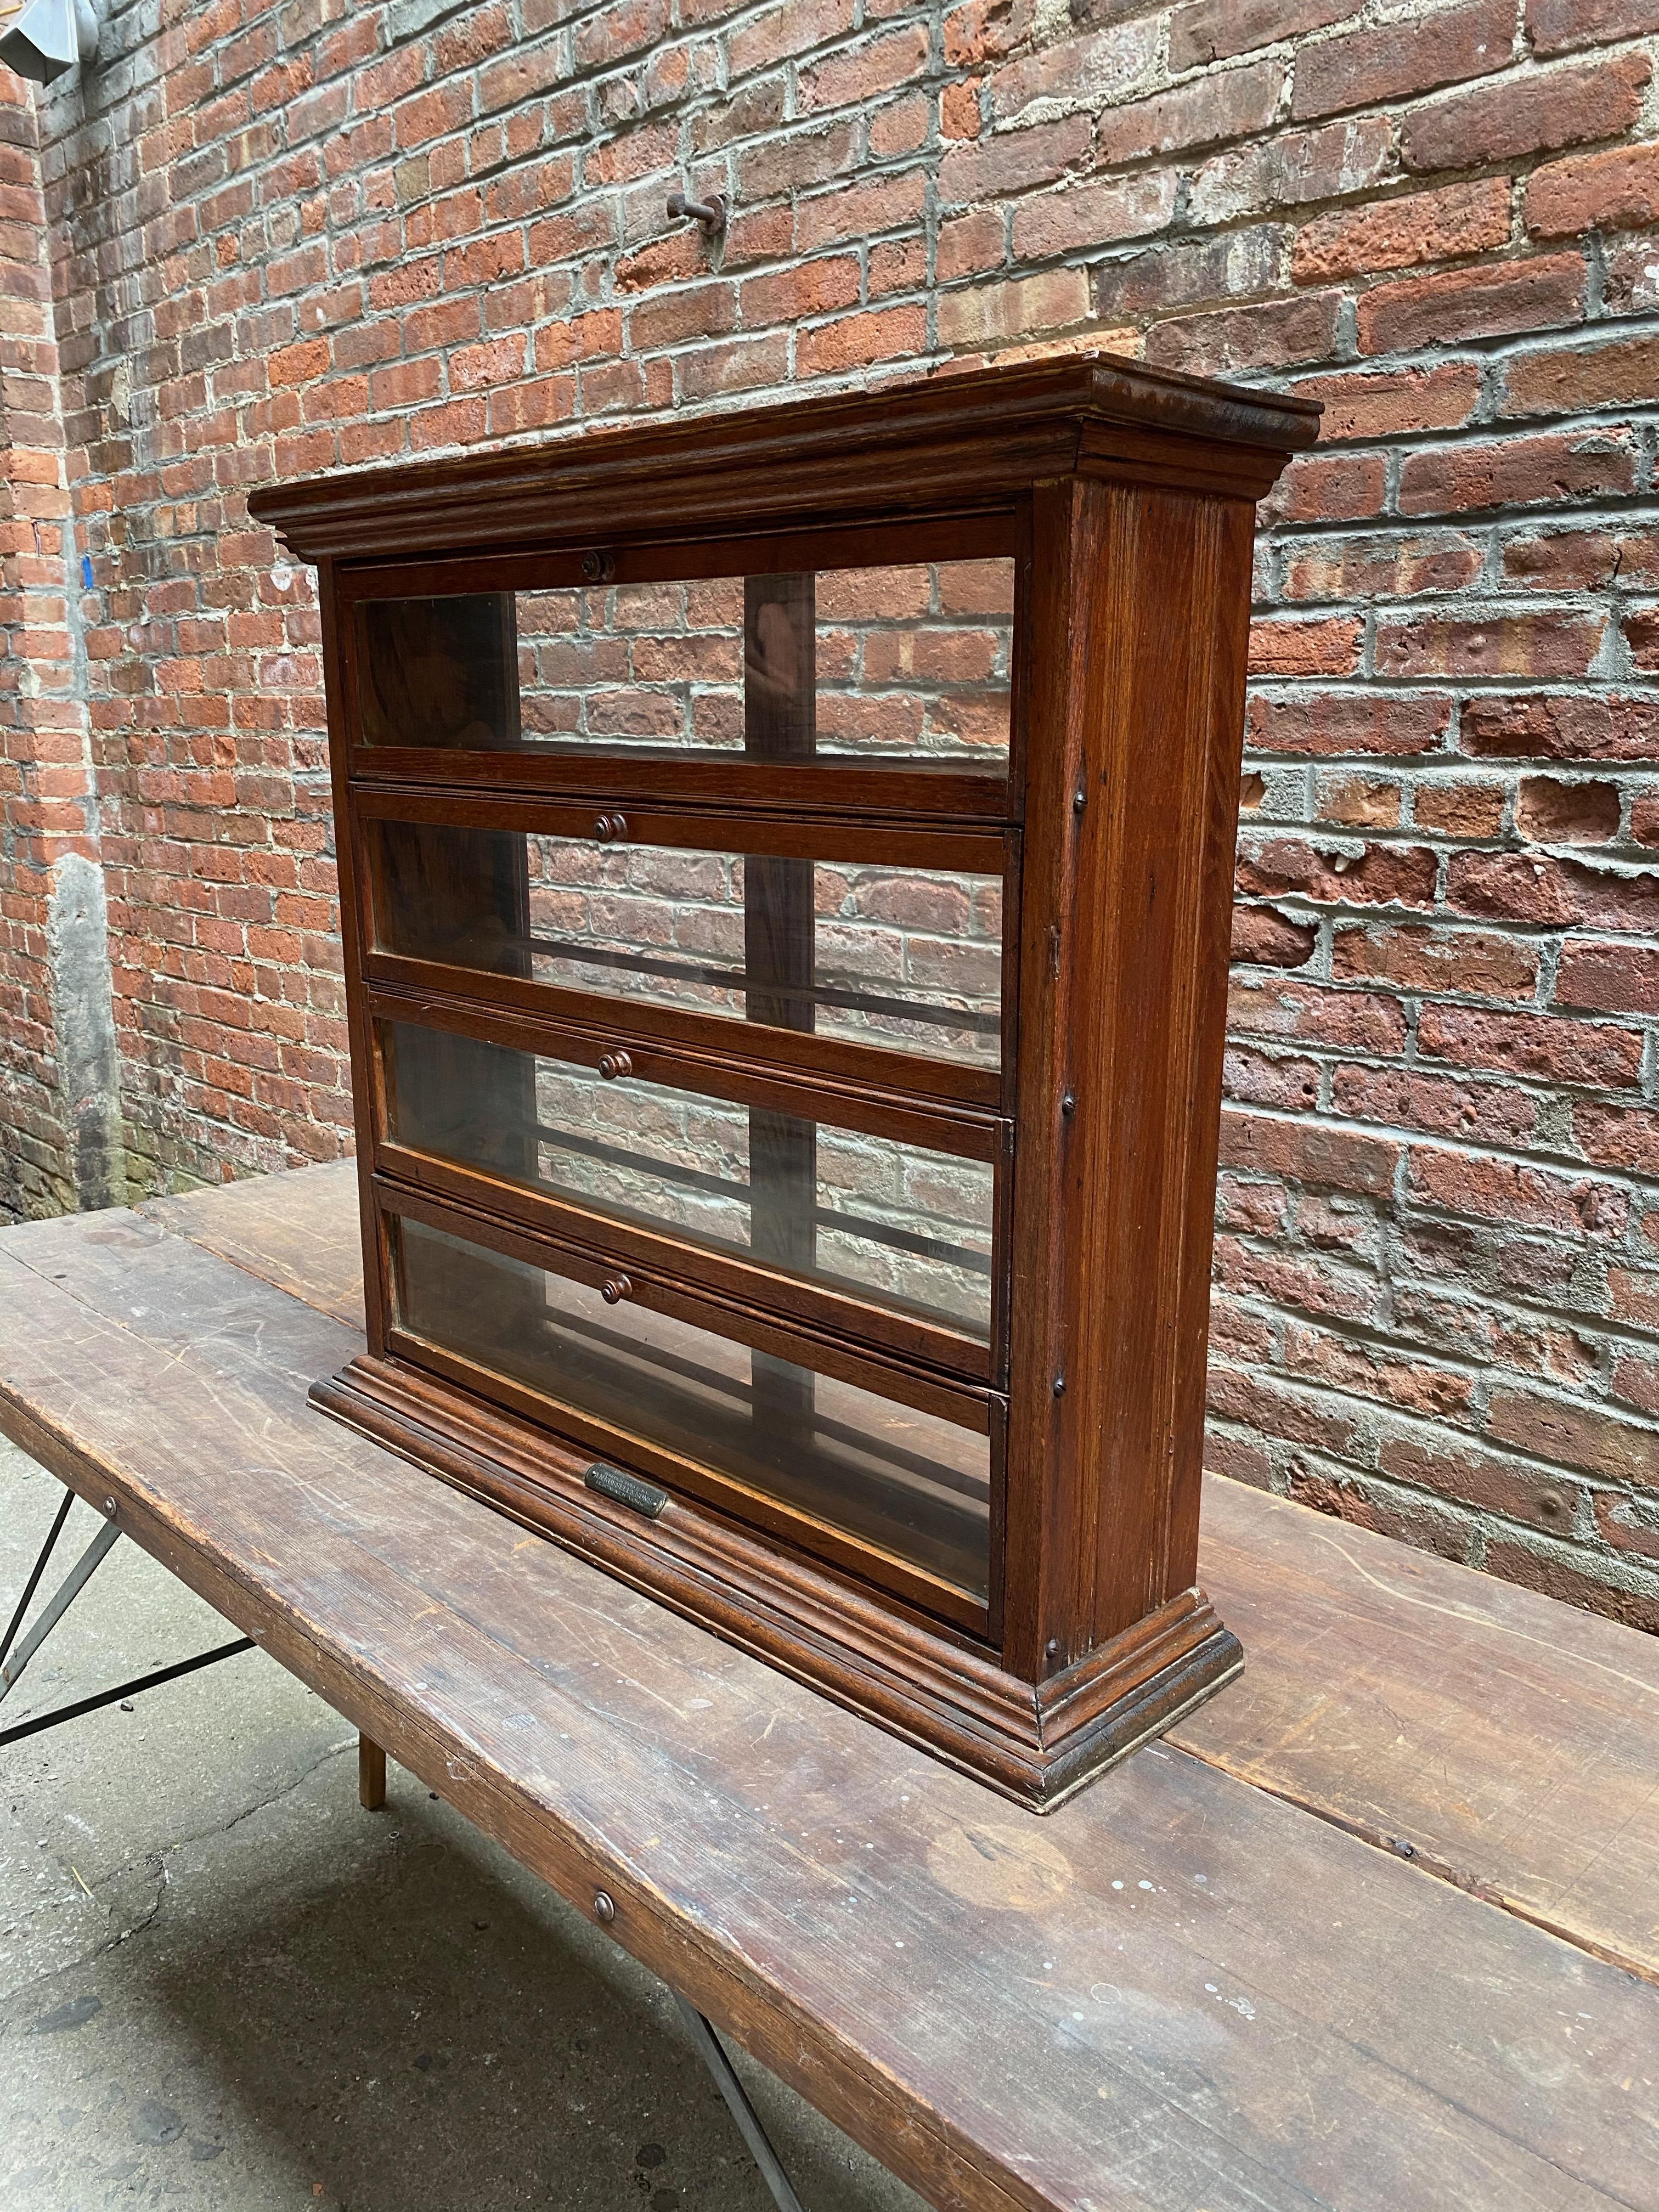 A.N. Russel & Sons oak and glass spool display cabinet. Old counter top general or dry goods store showcase. Solid oak construction with glass panel front and back. Four pullout / pull-out and drop down panels with dowel construction interiors.